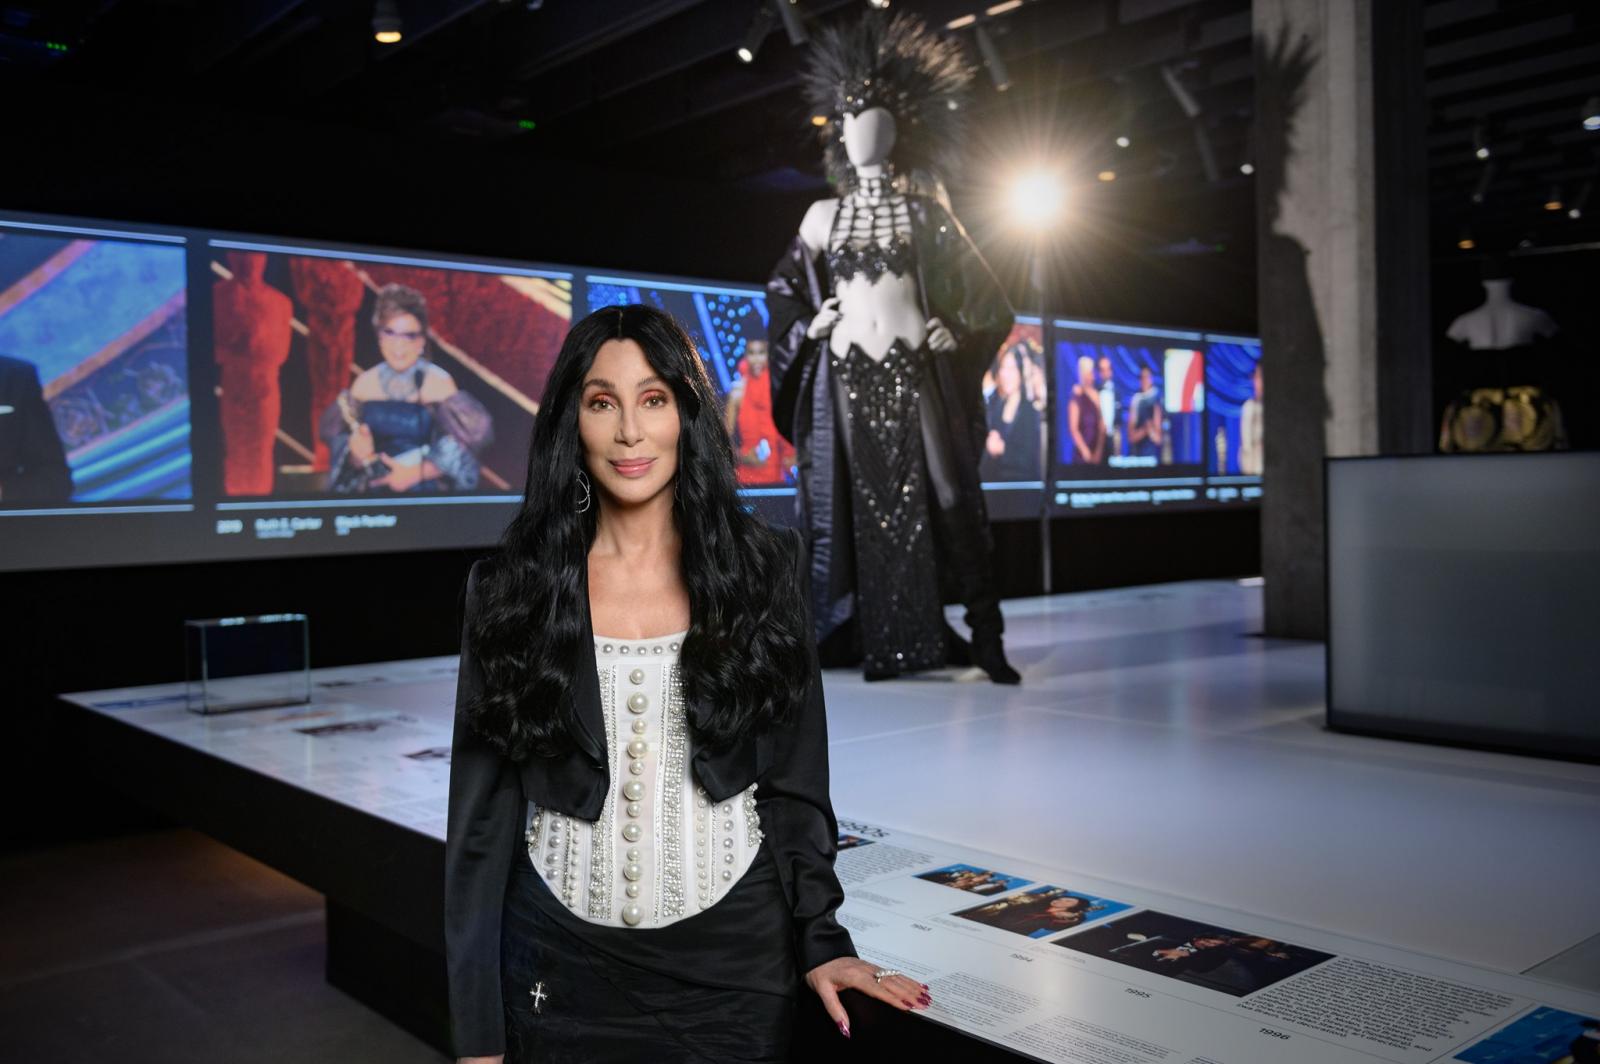 On Set - Cher on "A Night in the Academy Museum" ABC